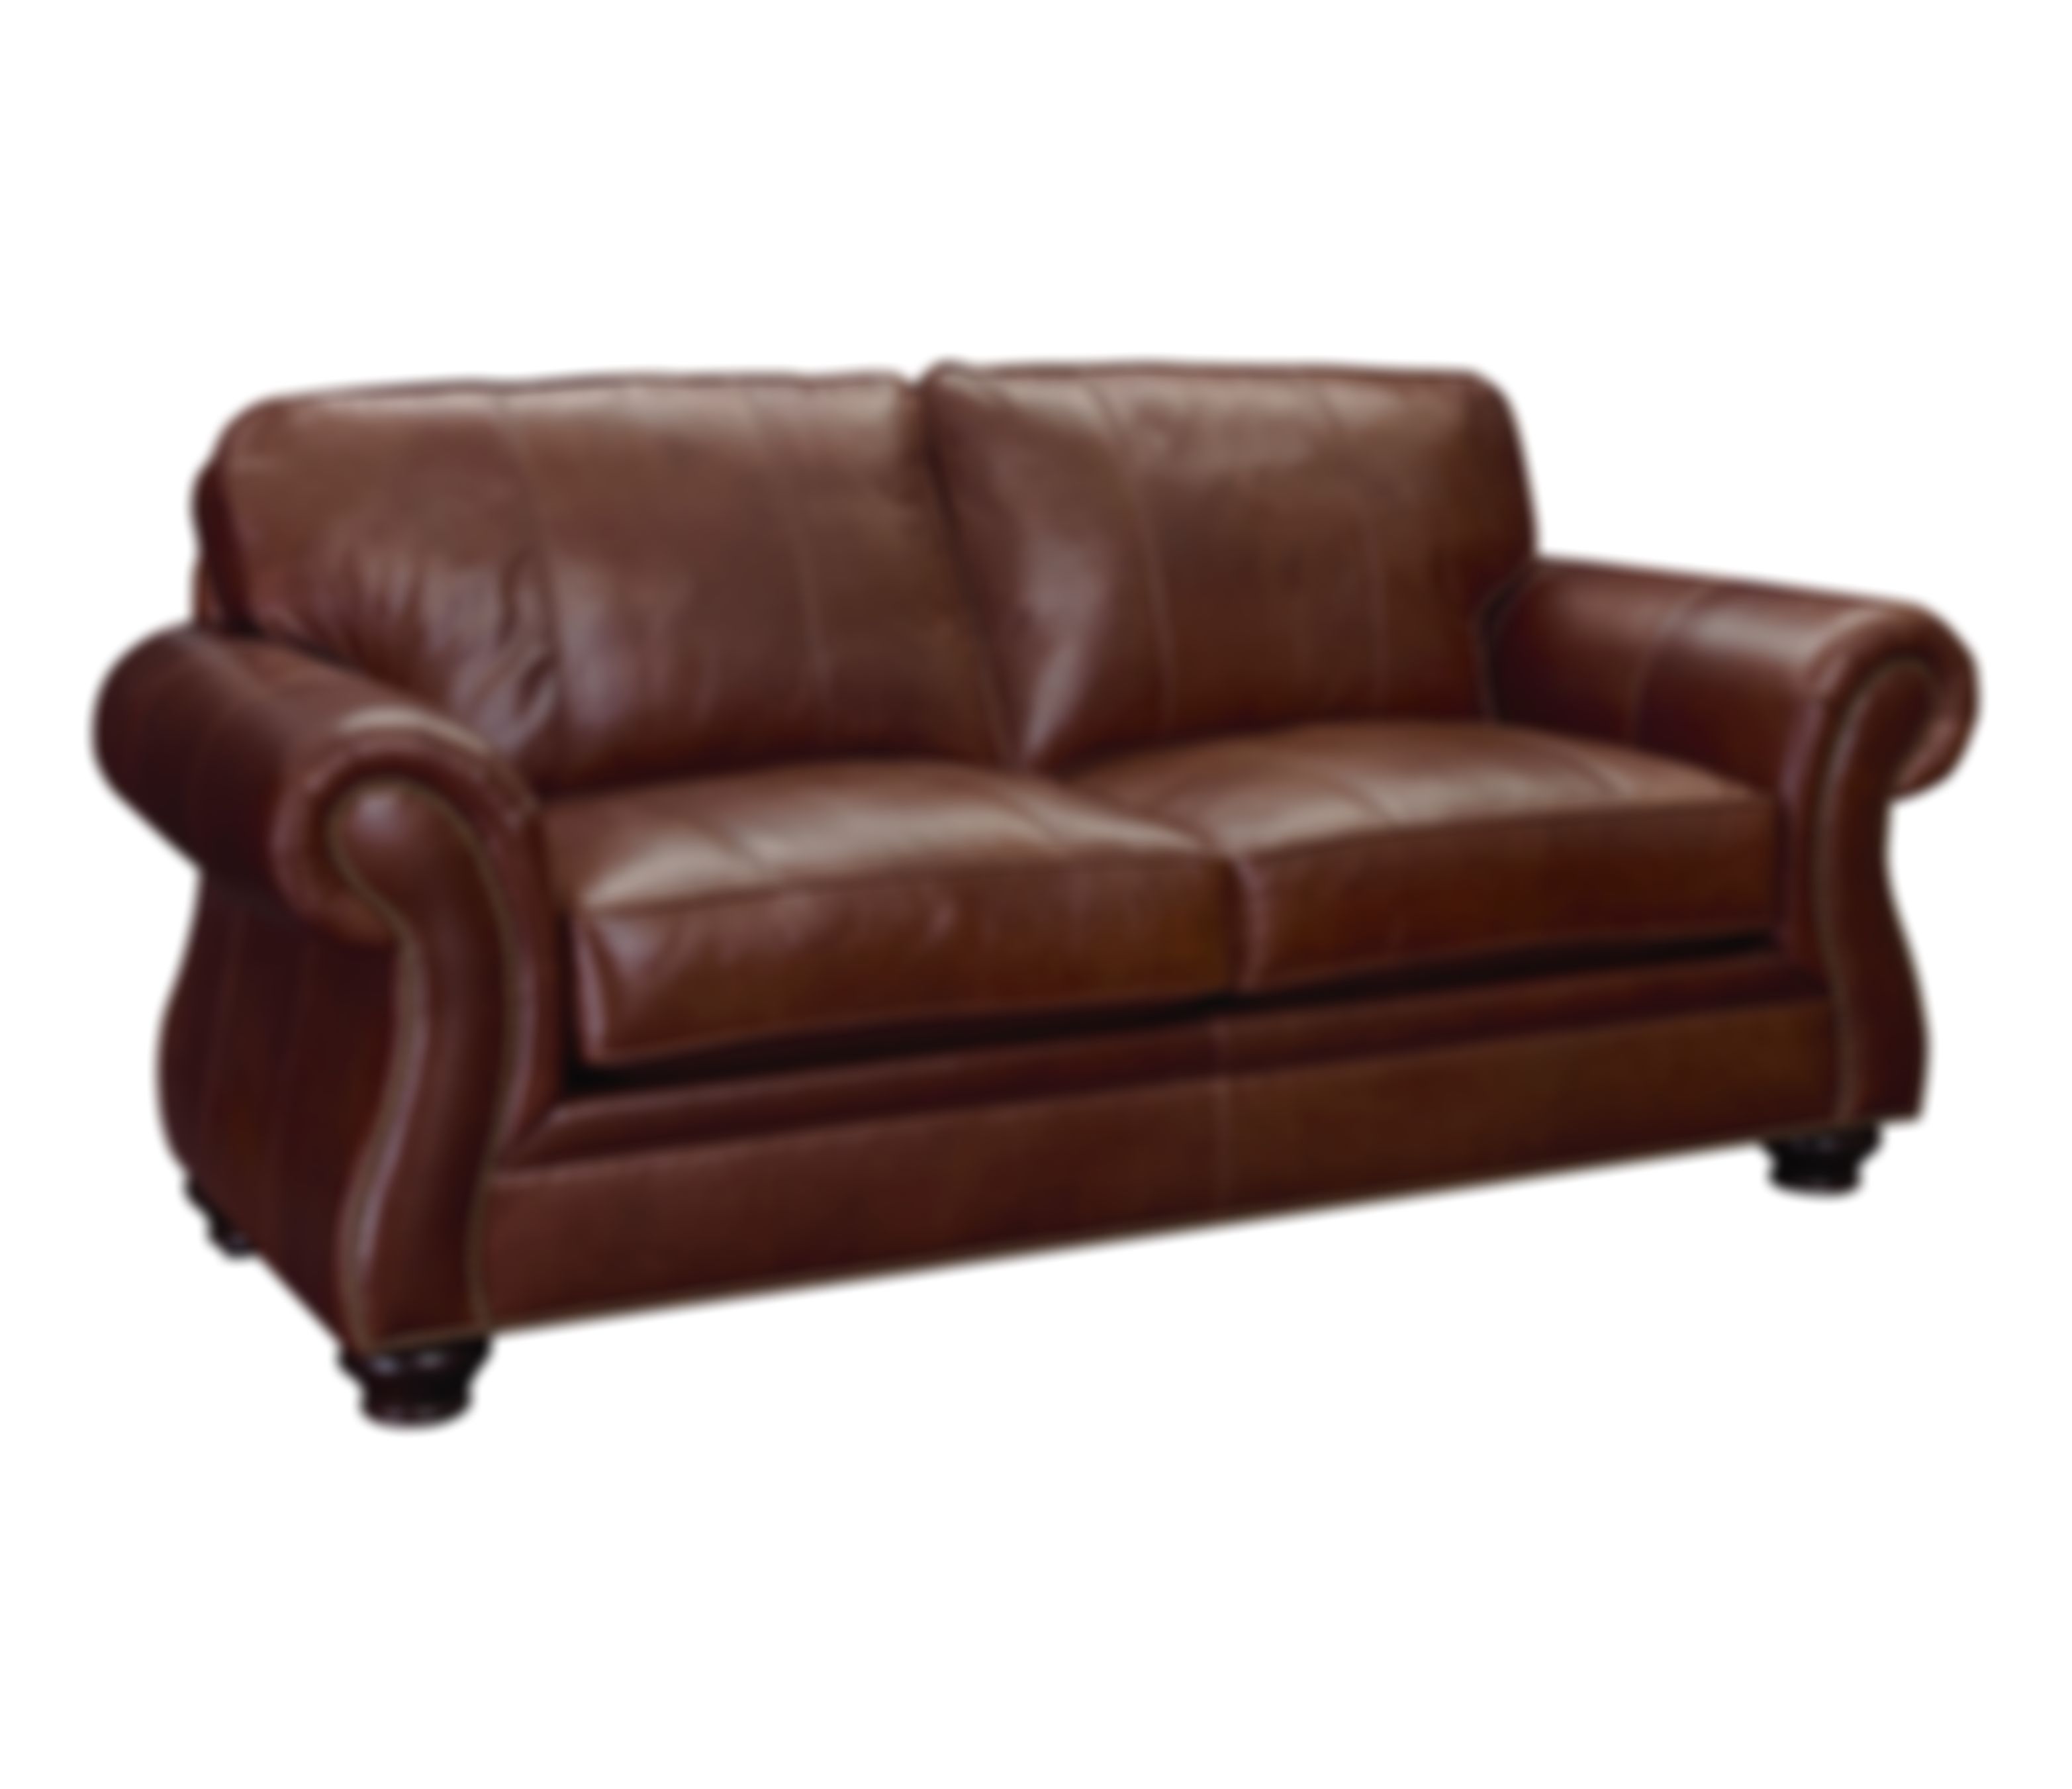 Laramie 5081 Sofa Collection Customize, Broyhill Leather Couch